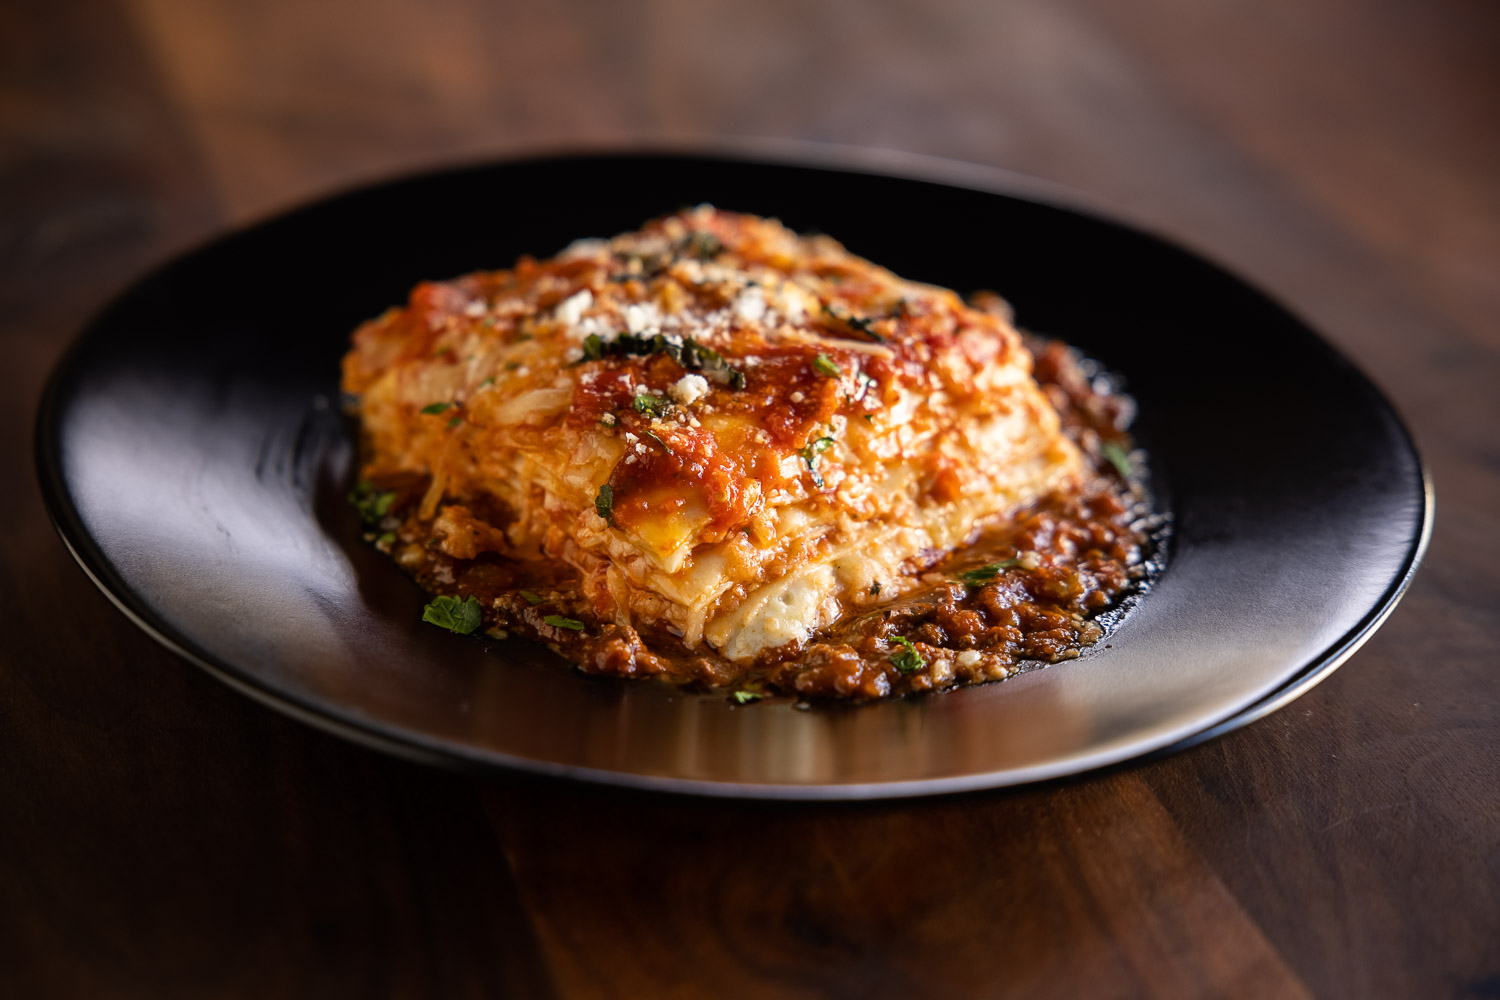 Ten-layer lasagna at Catelli's in Geyserville. (Chris Hardy/for Sonoma Magazine)